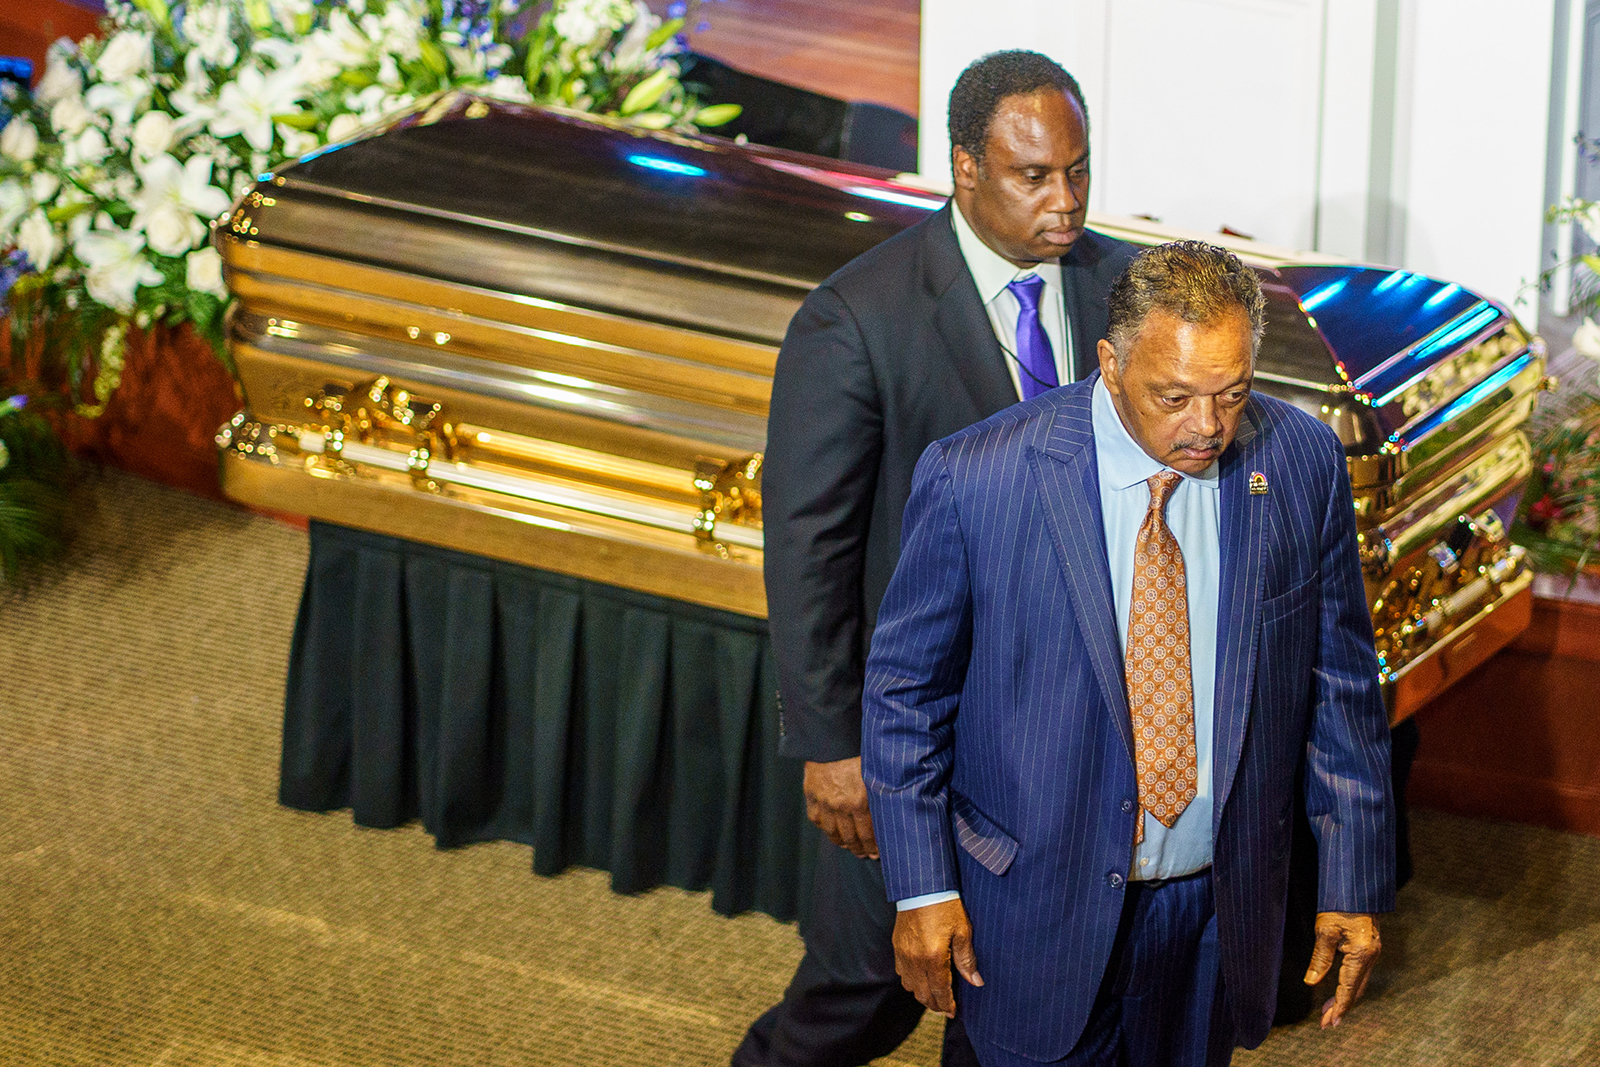 Reverend Jesse Jackson (Right) and his son Jonathan Jackson pay their respects to George Floyd during a memorial service in his honor at North Central University's Frank J. Lindquist Sanctuary in Minneapolis, on June 4.